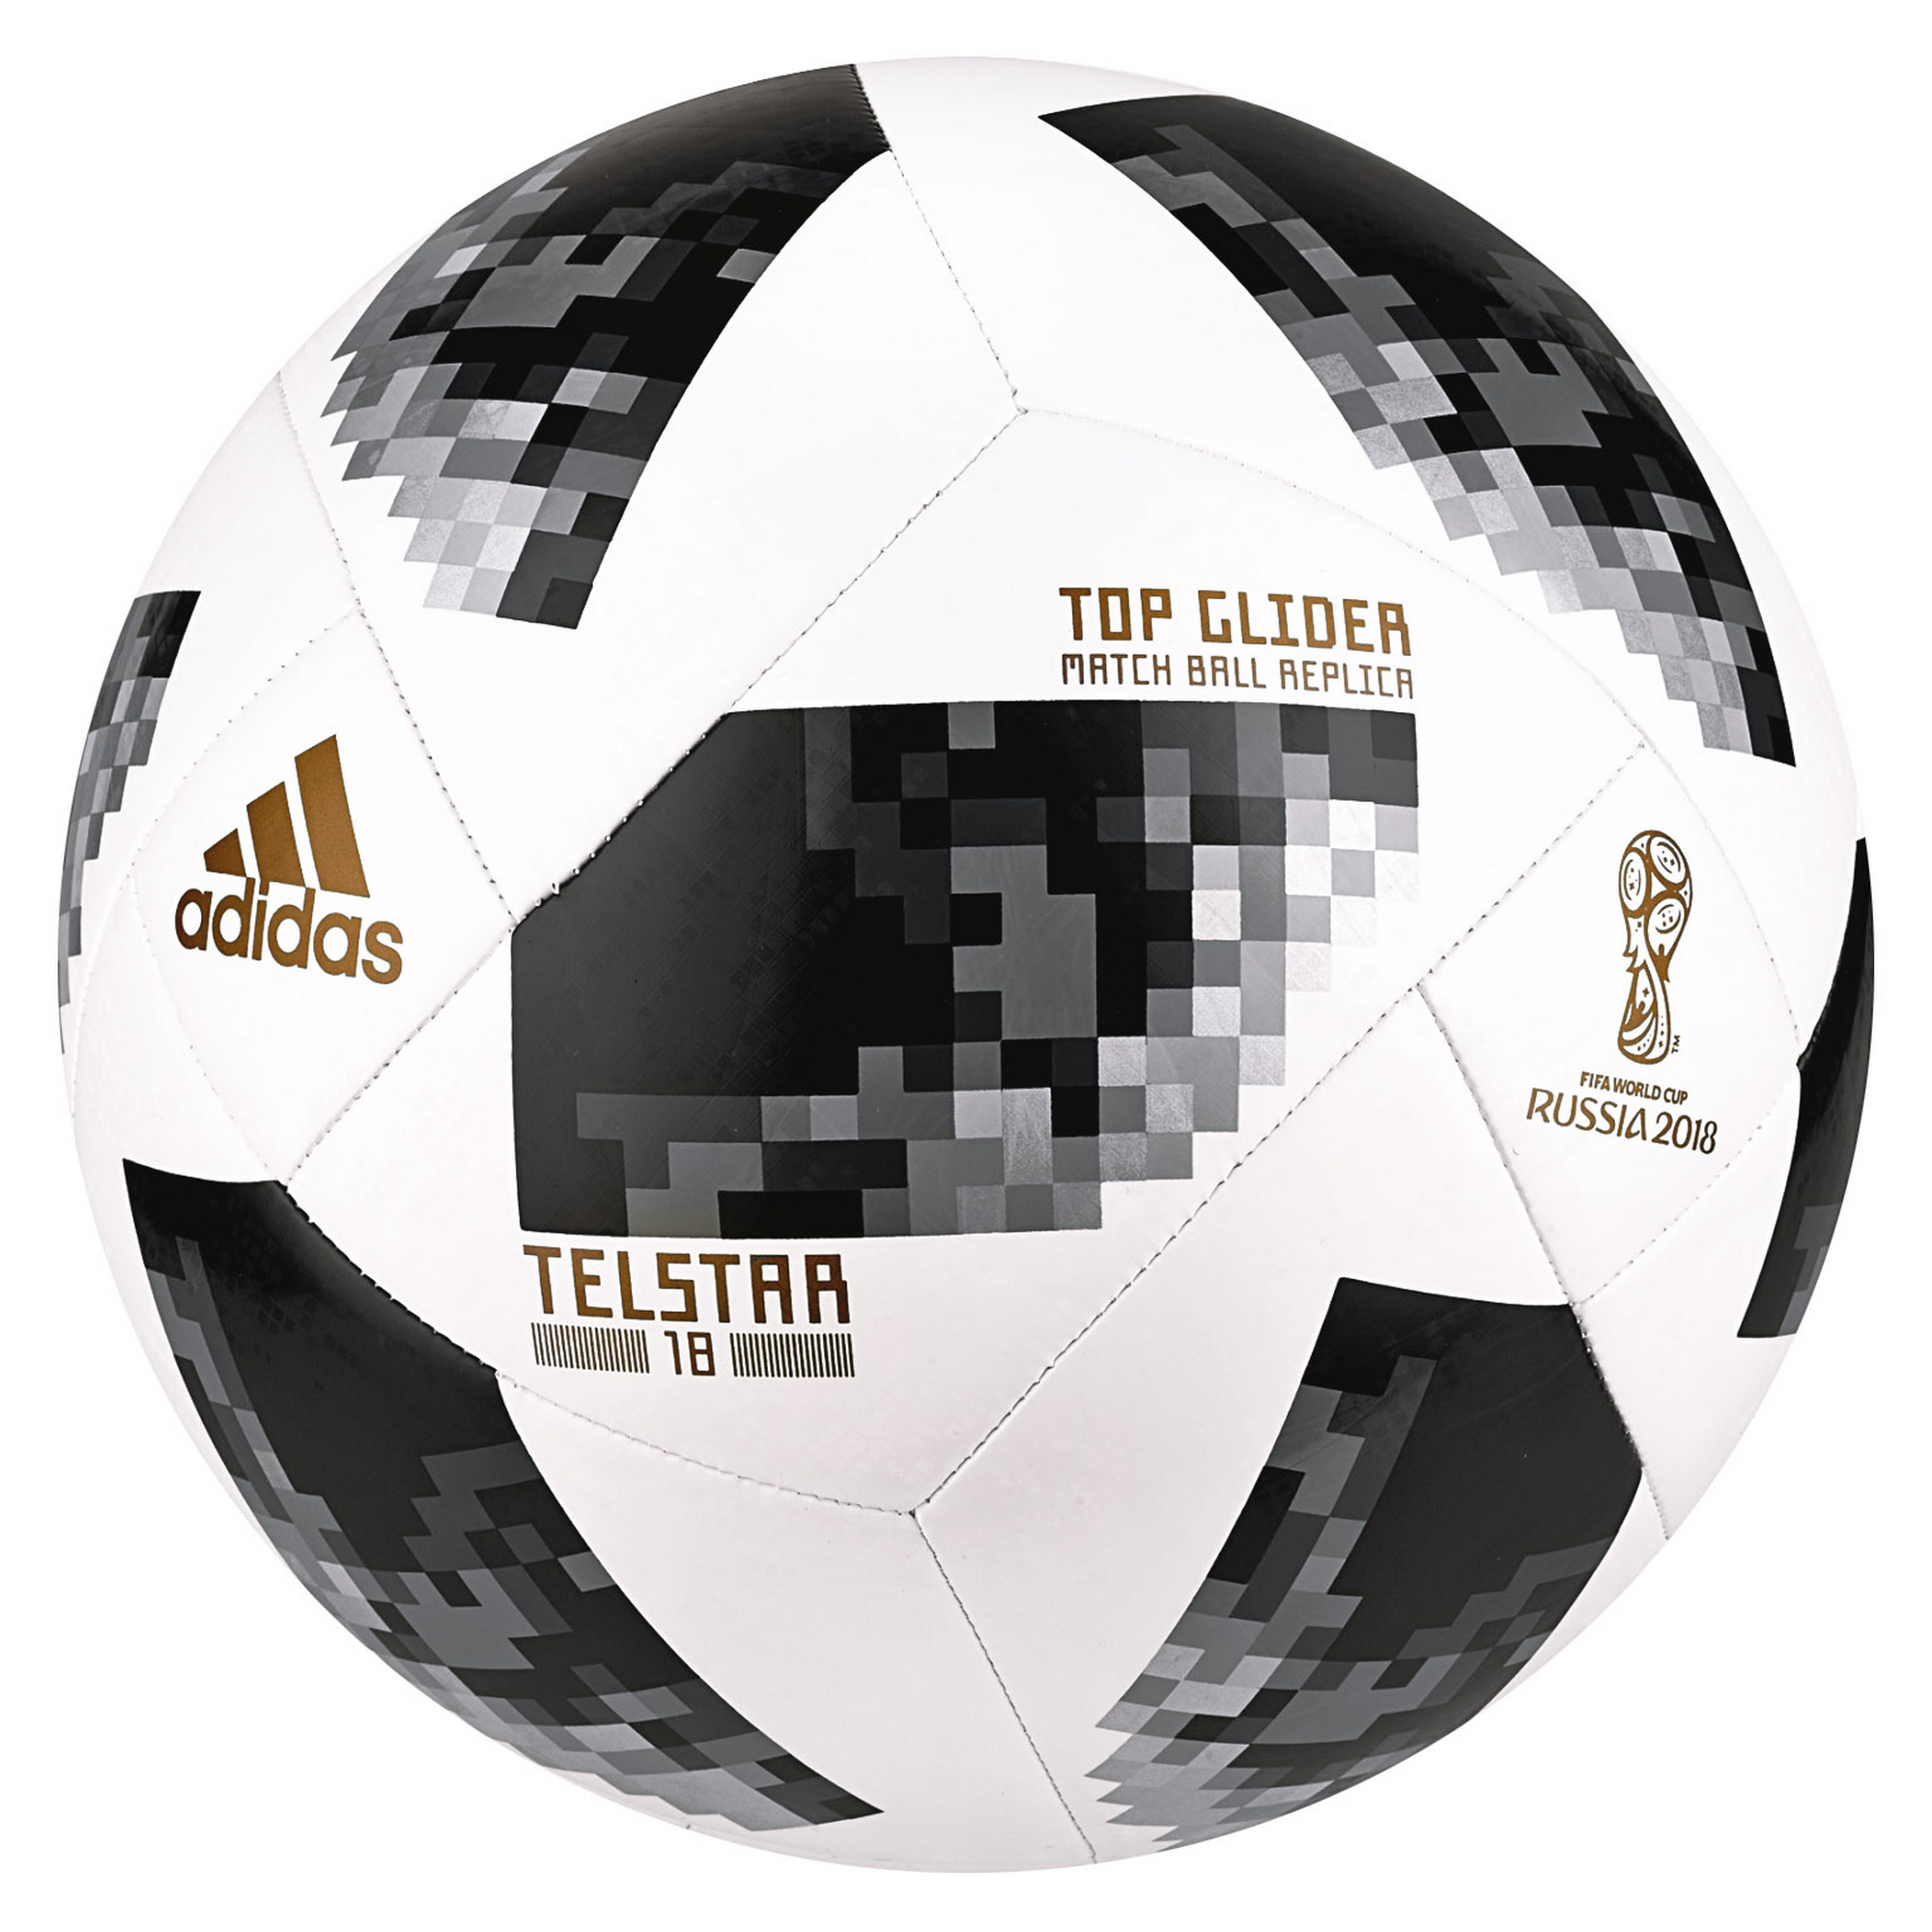 adidas WM-Fußball FIFA 2018 Telstar 18 "Top Glider" + product picture